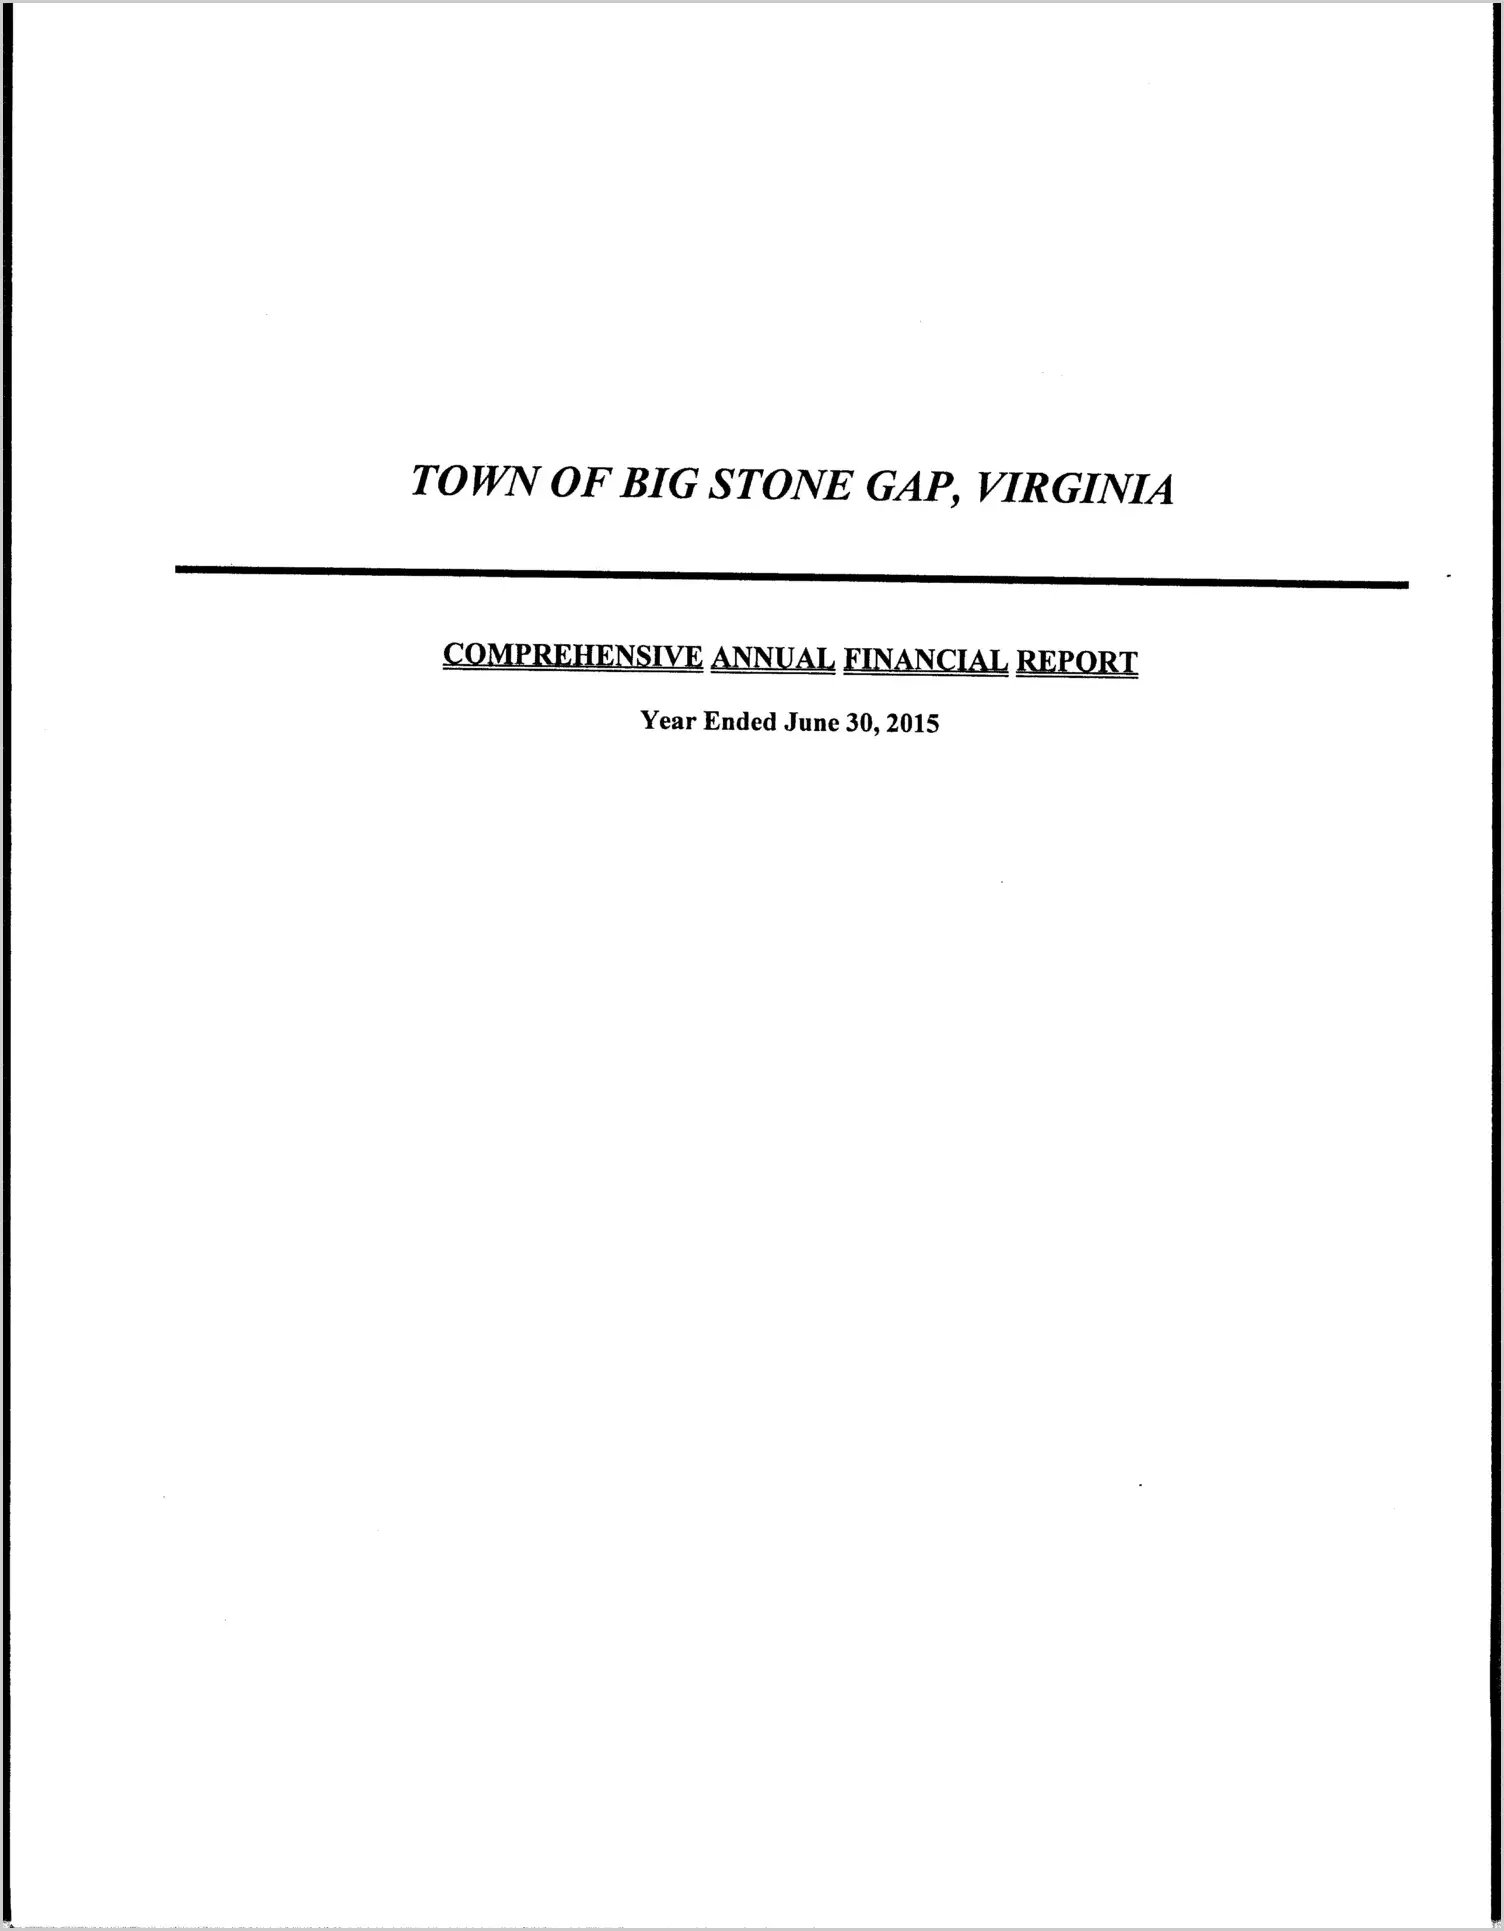 2015 Annual Financial Report for Town of Big Stone Gap